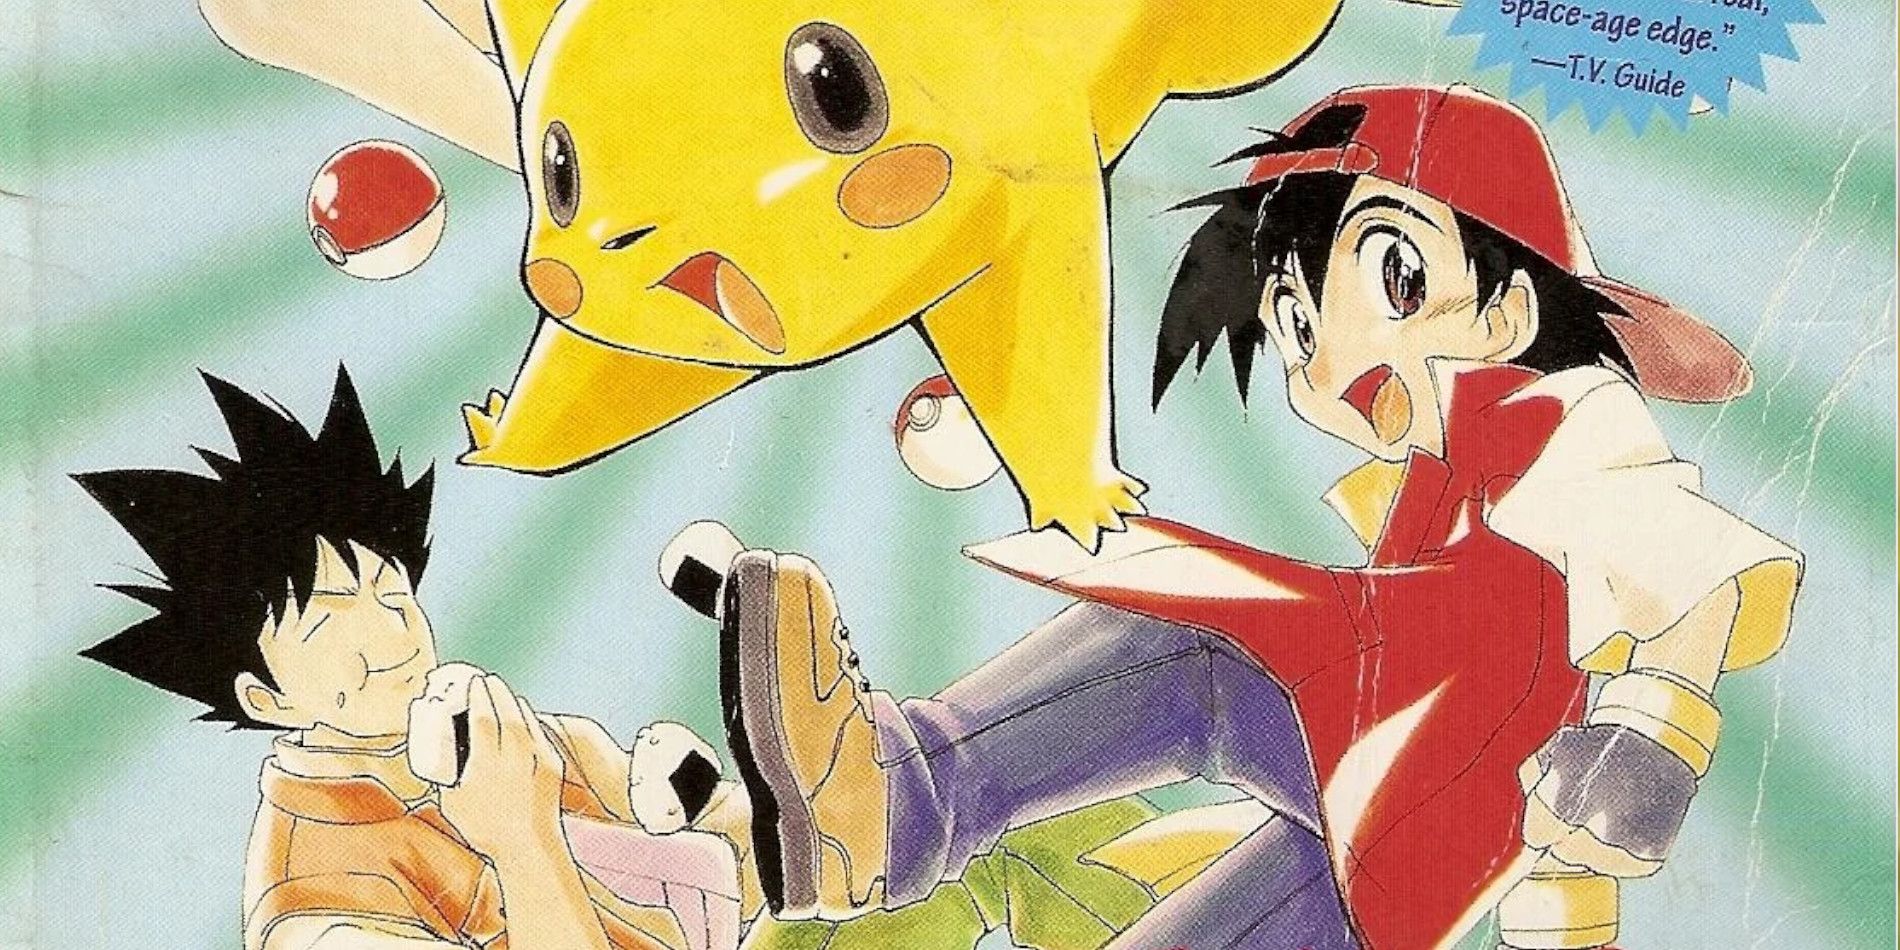 Reading the Pokémon manga for the first time and came across this